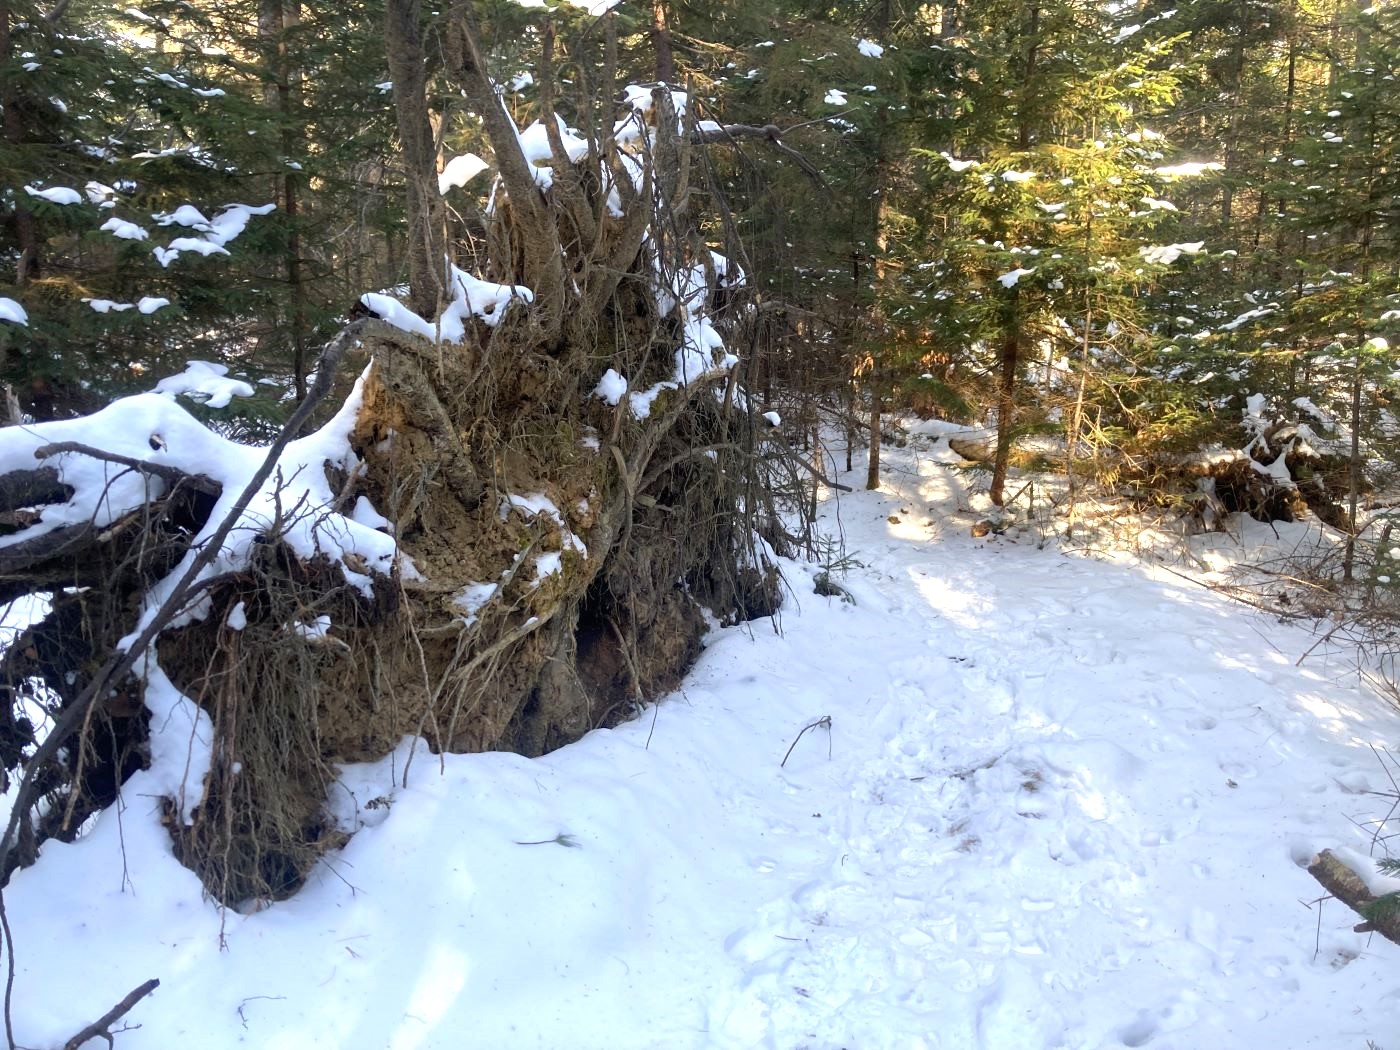 Trails in winter: exposed root ball